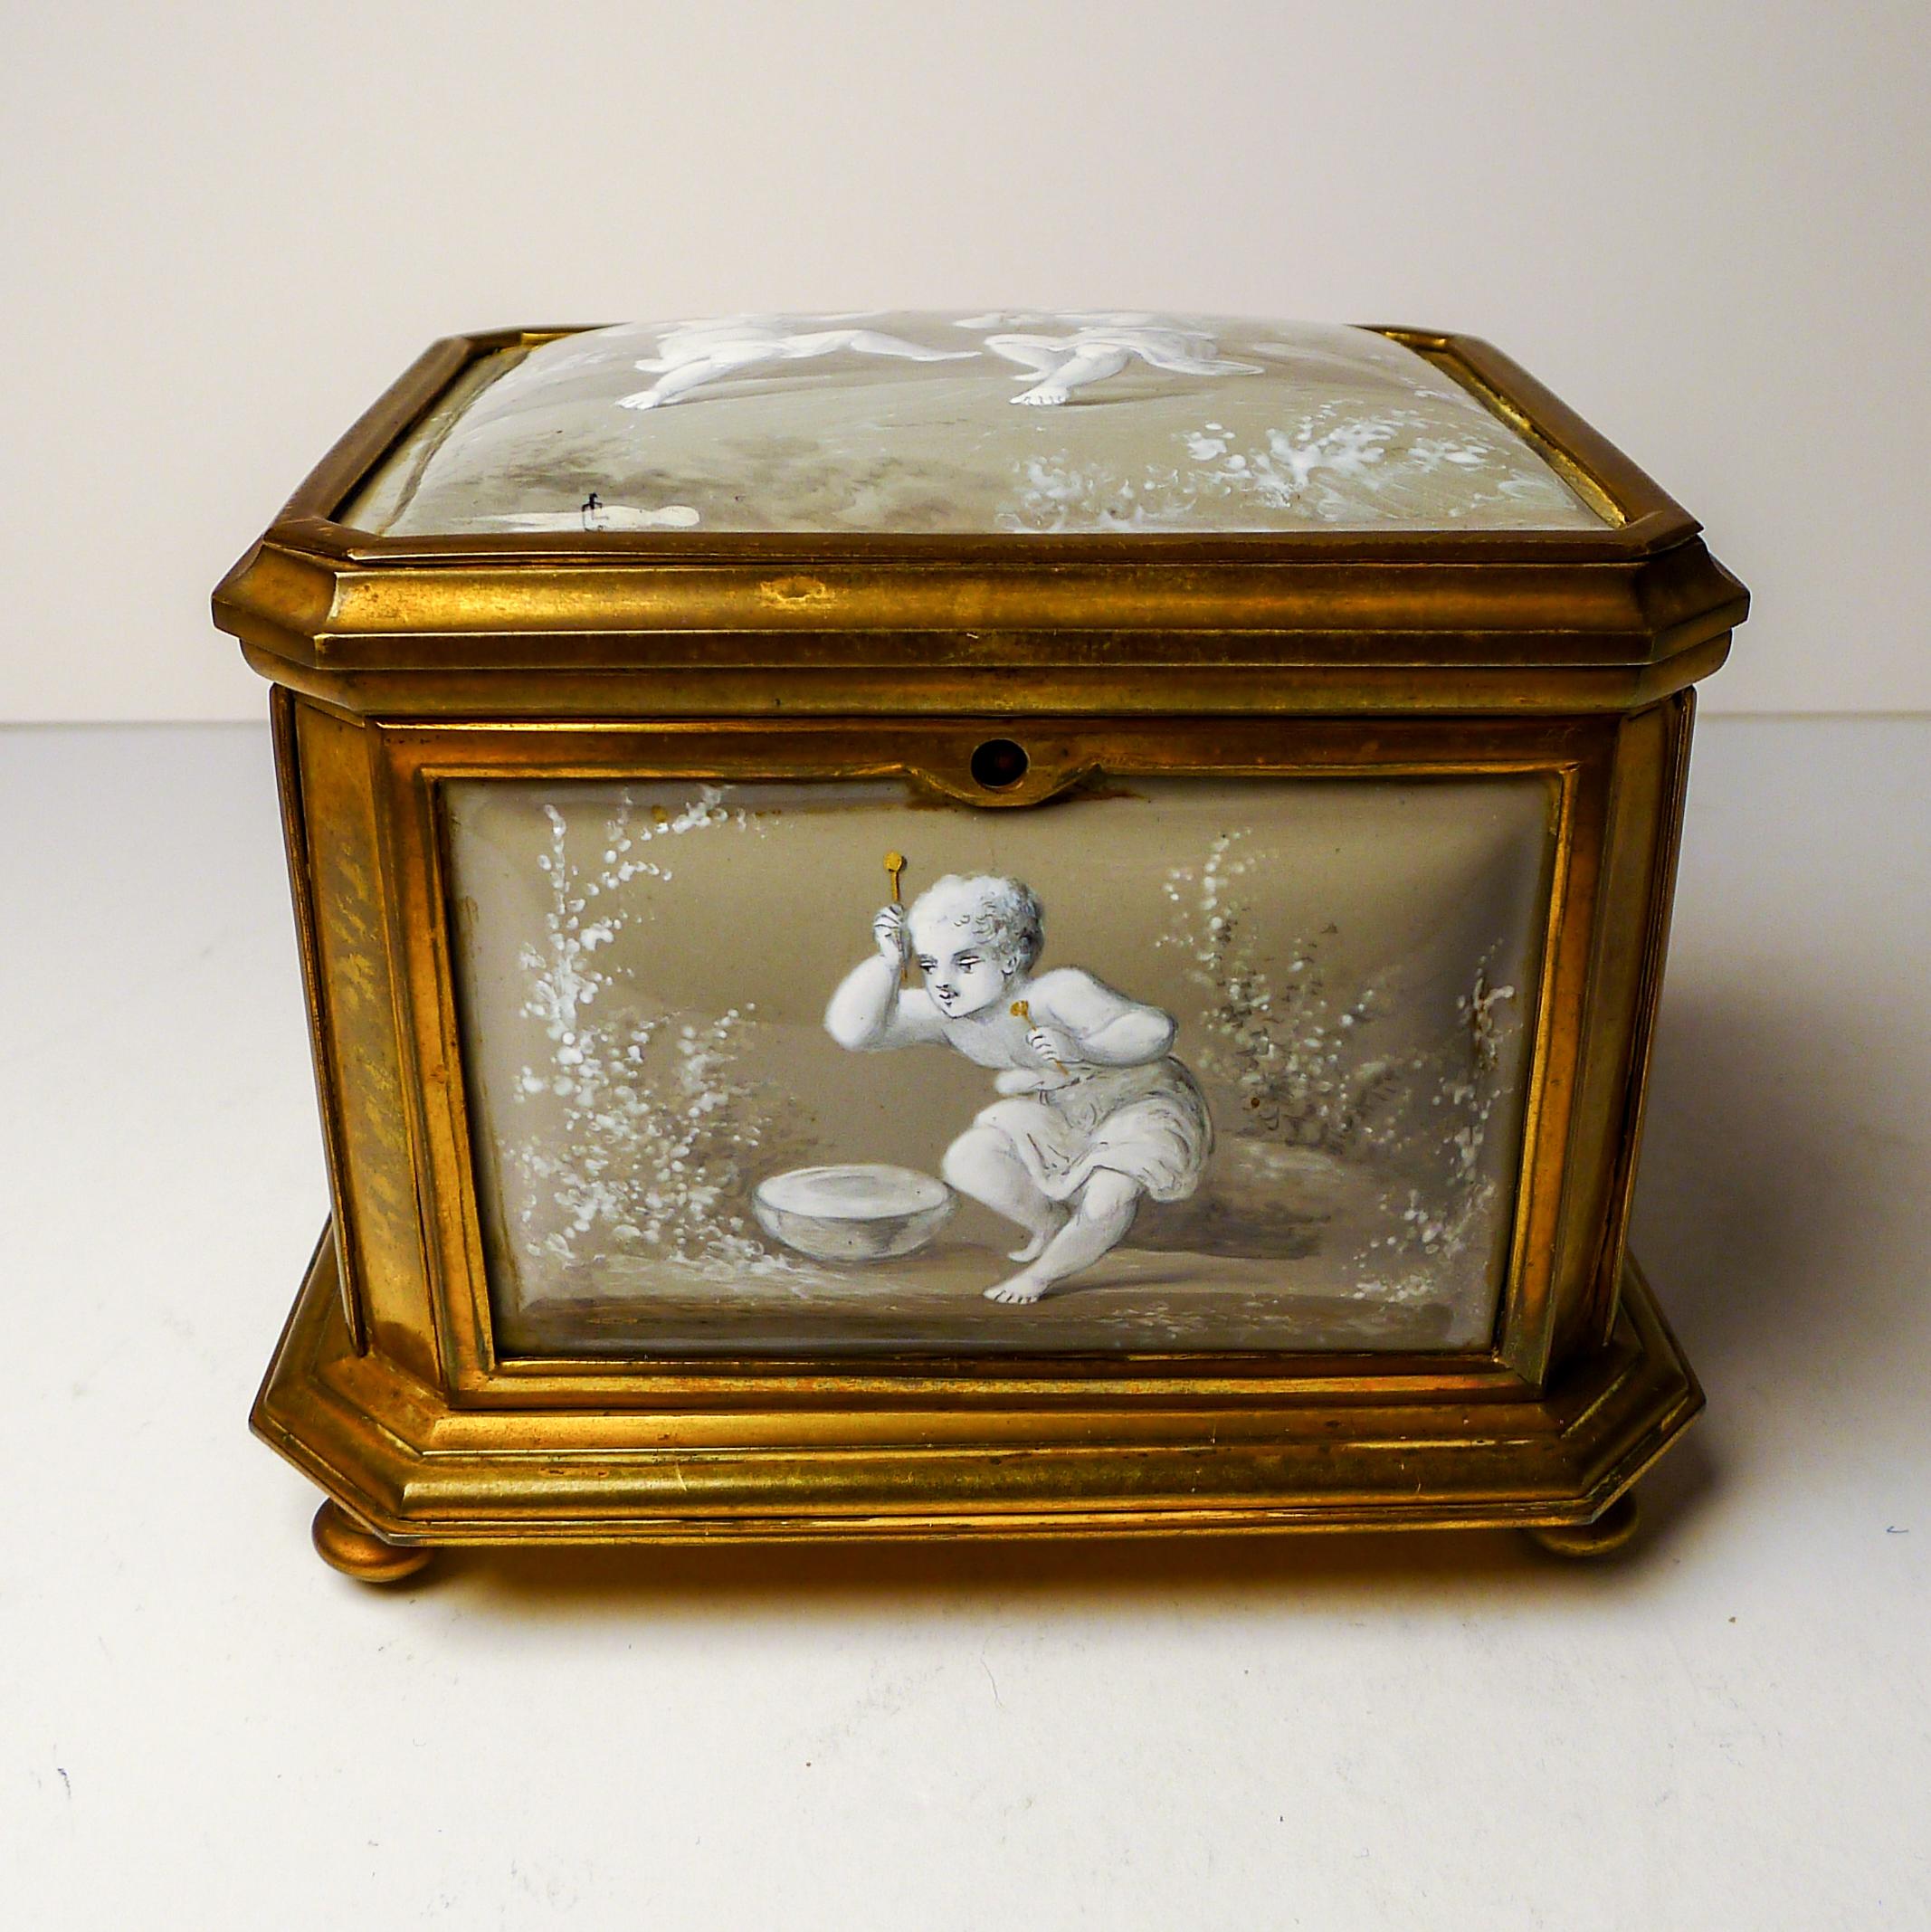 An absolute gem, made in France in around 1860, this charming box or casket is made from a heavy Ormolu and standing on four original feet.
The undamaged five Limoges enamel panels are what this such a special piece, in a fashionable soft French